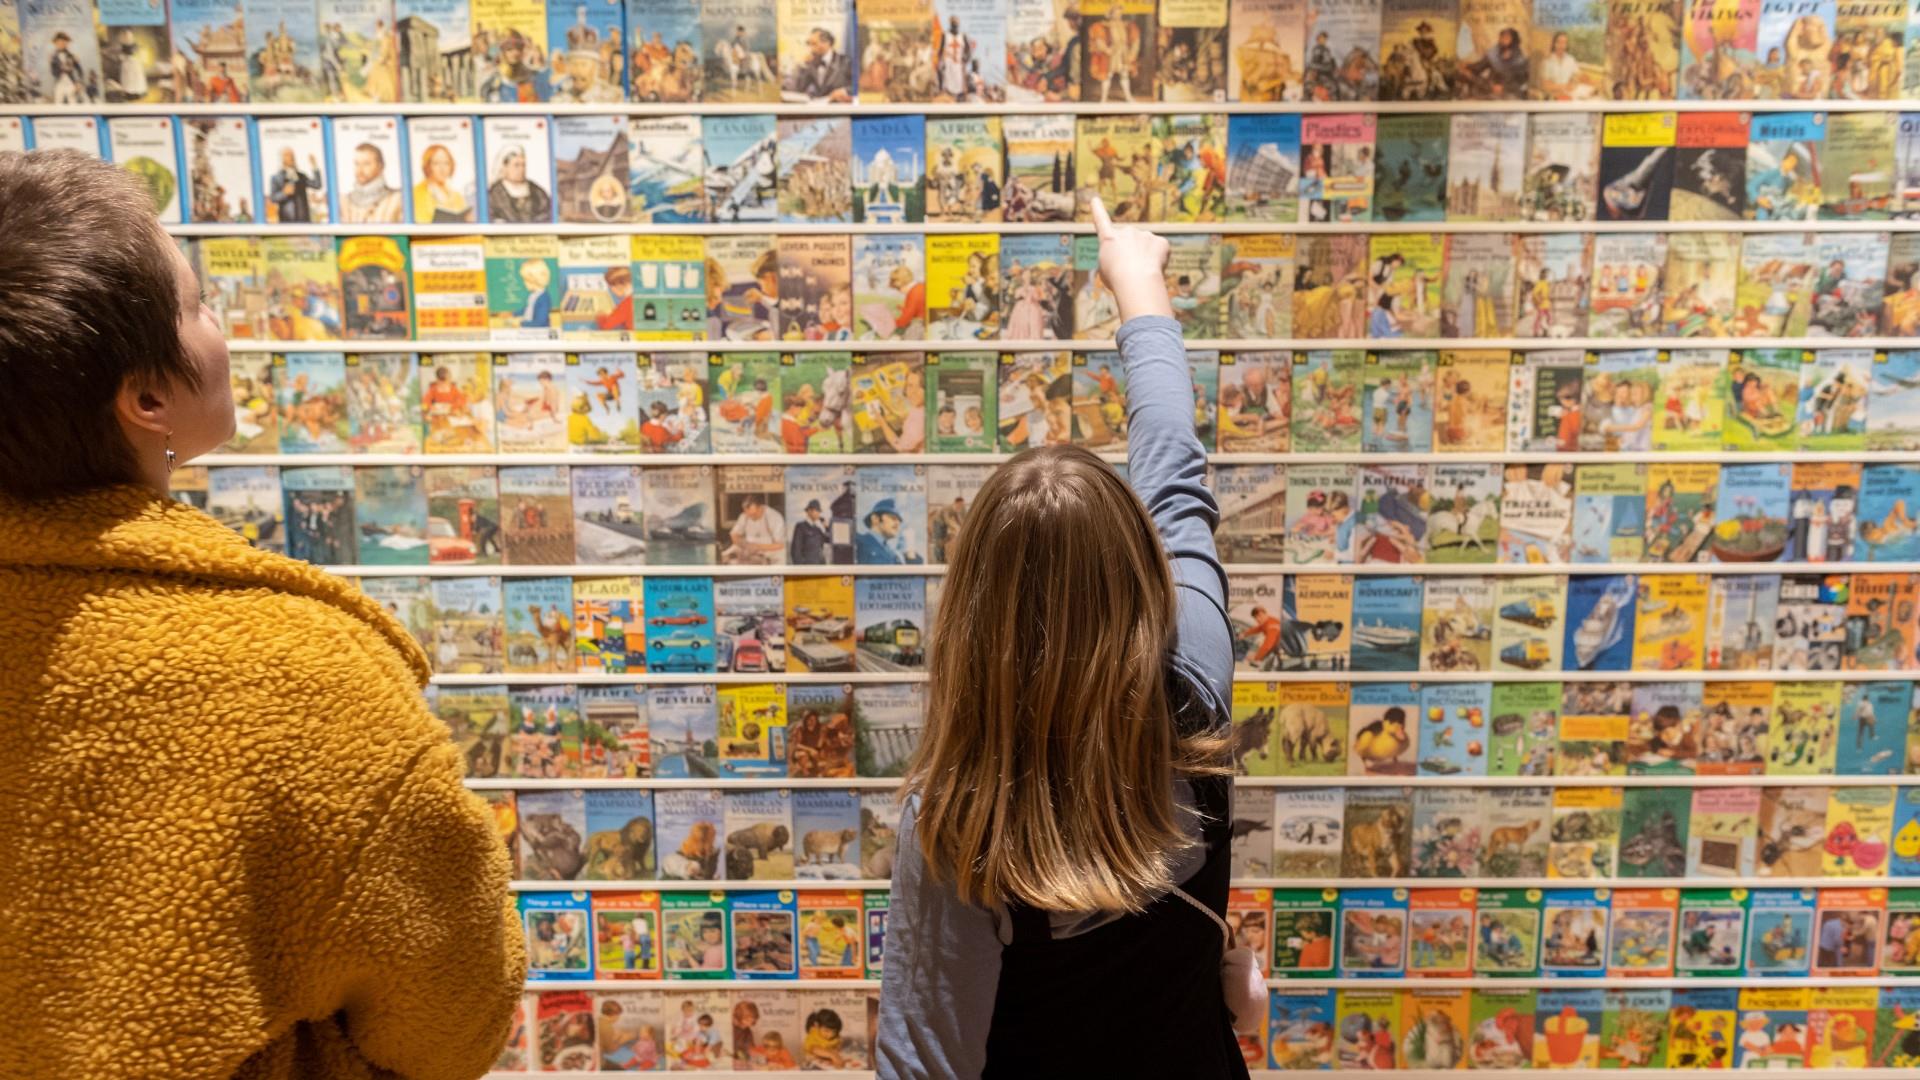 Child looking at book covers on wall